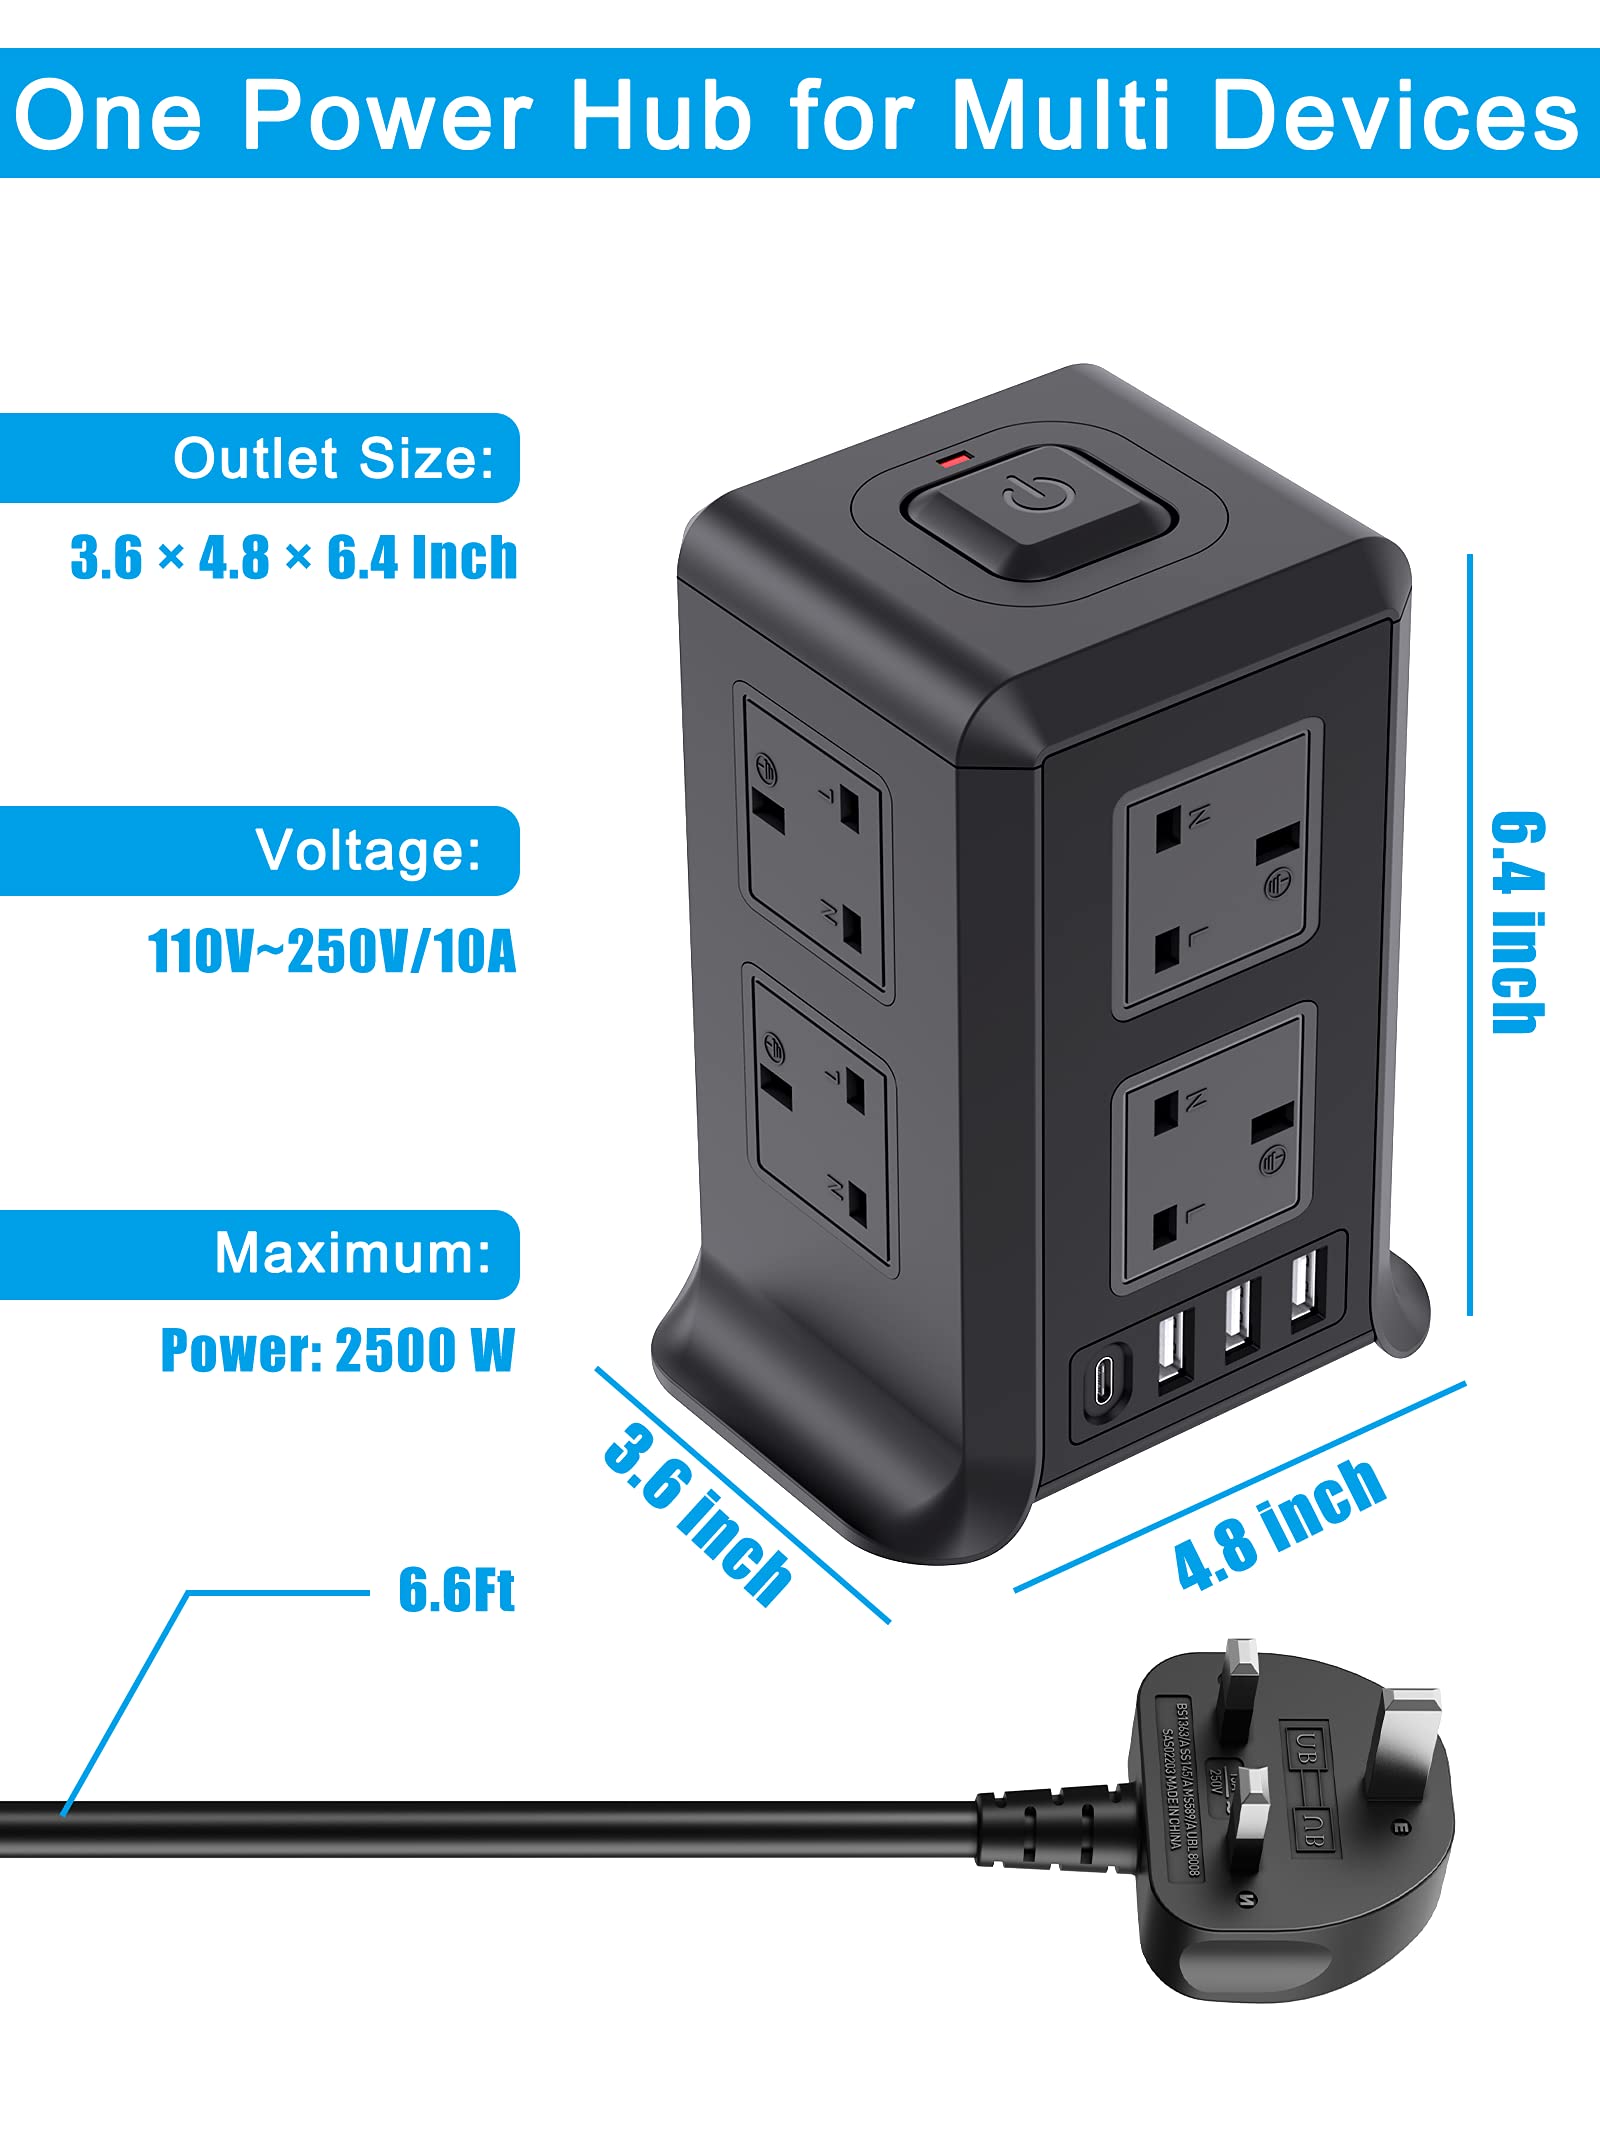 Tower Extension Lead, 8 Way Plug Extension and 3 USB Ports(5V/2.4A) & 1 Type-C Port (5V/3A) Surge Protector Extension Lead Tower 2M Long Extension Cord for Home, Office